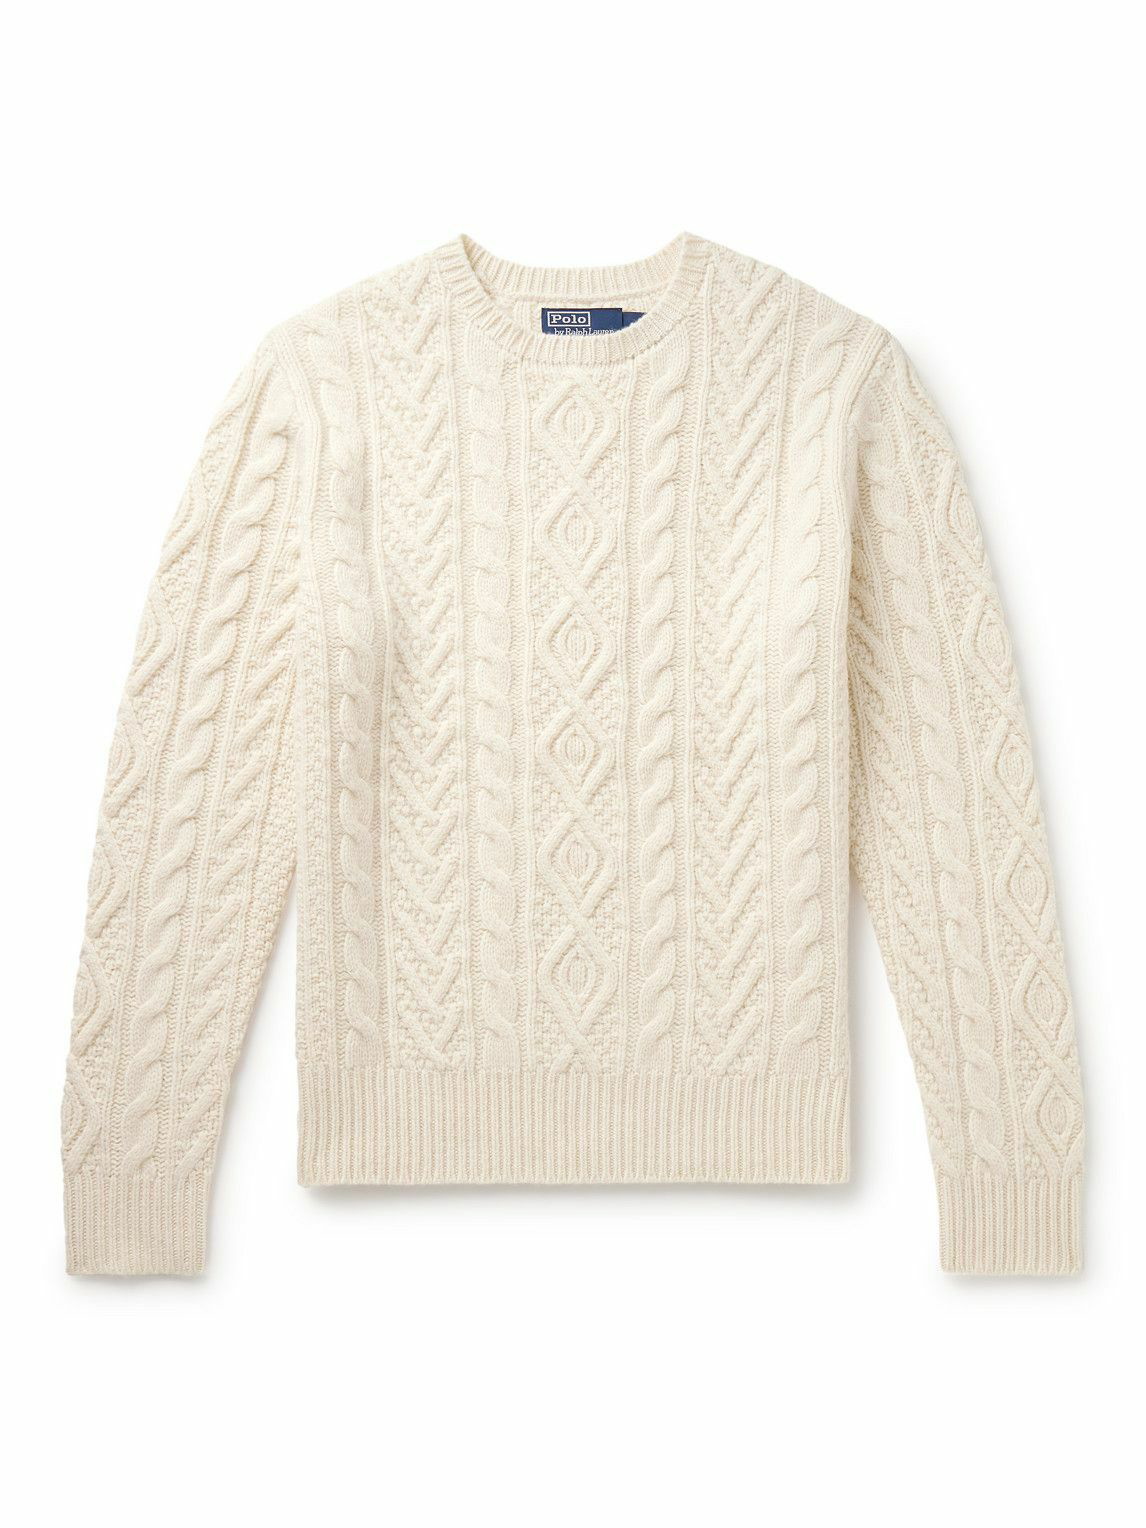 Polo Ralph Lauren - Cable-Knit Wool and Cashmere-Blend Sweater